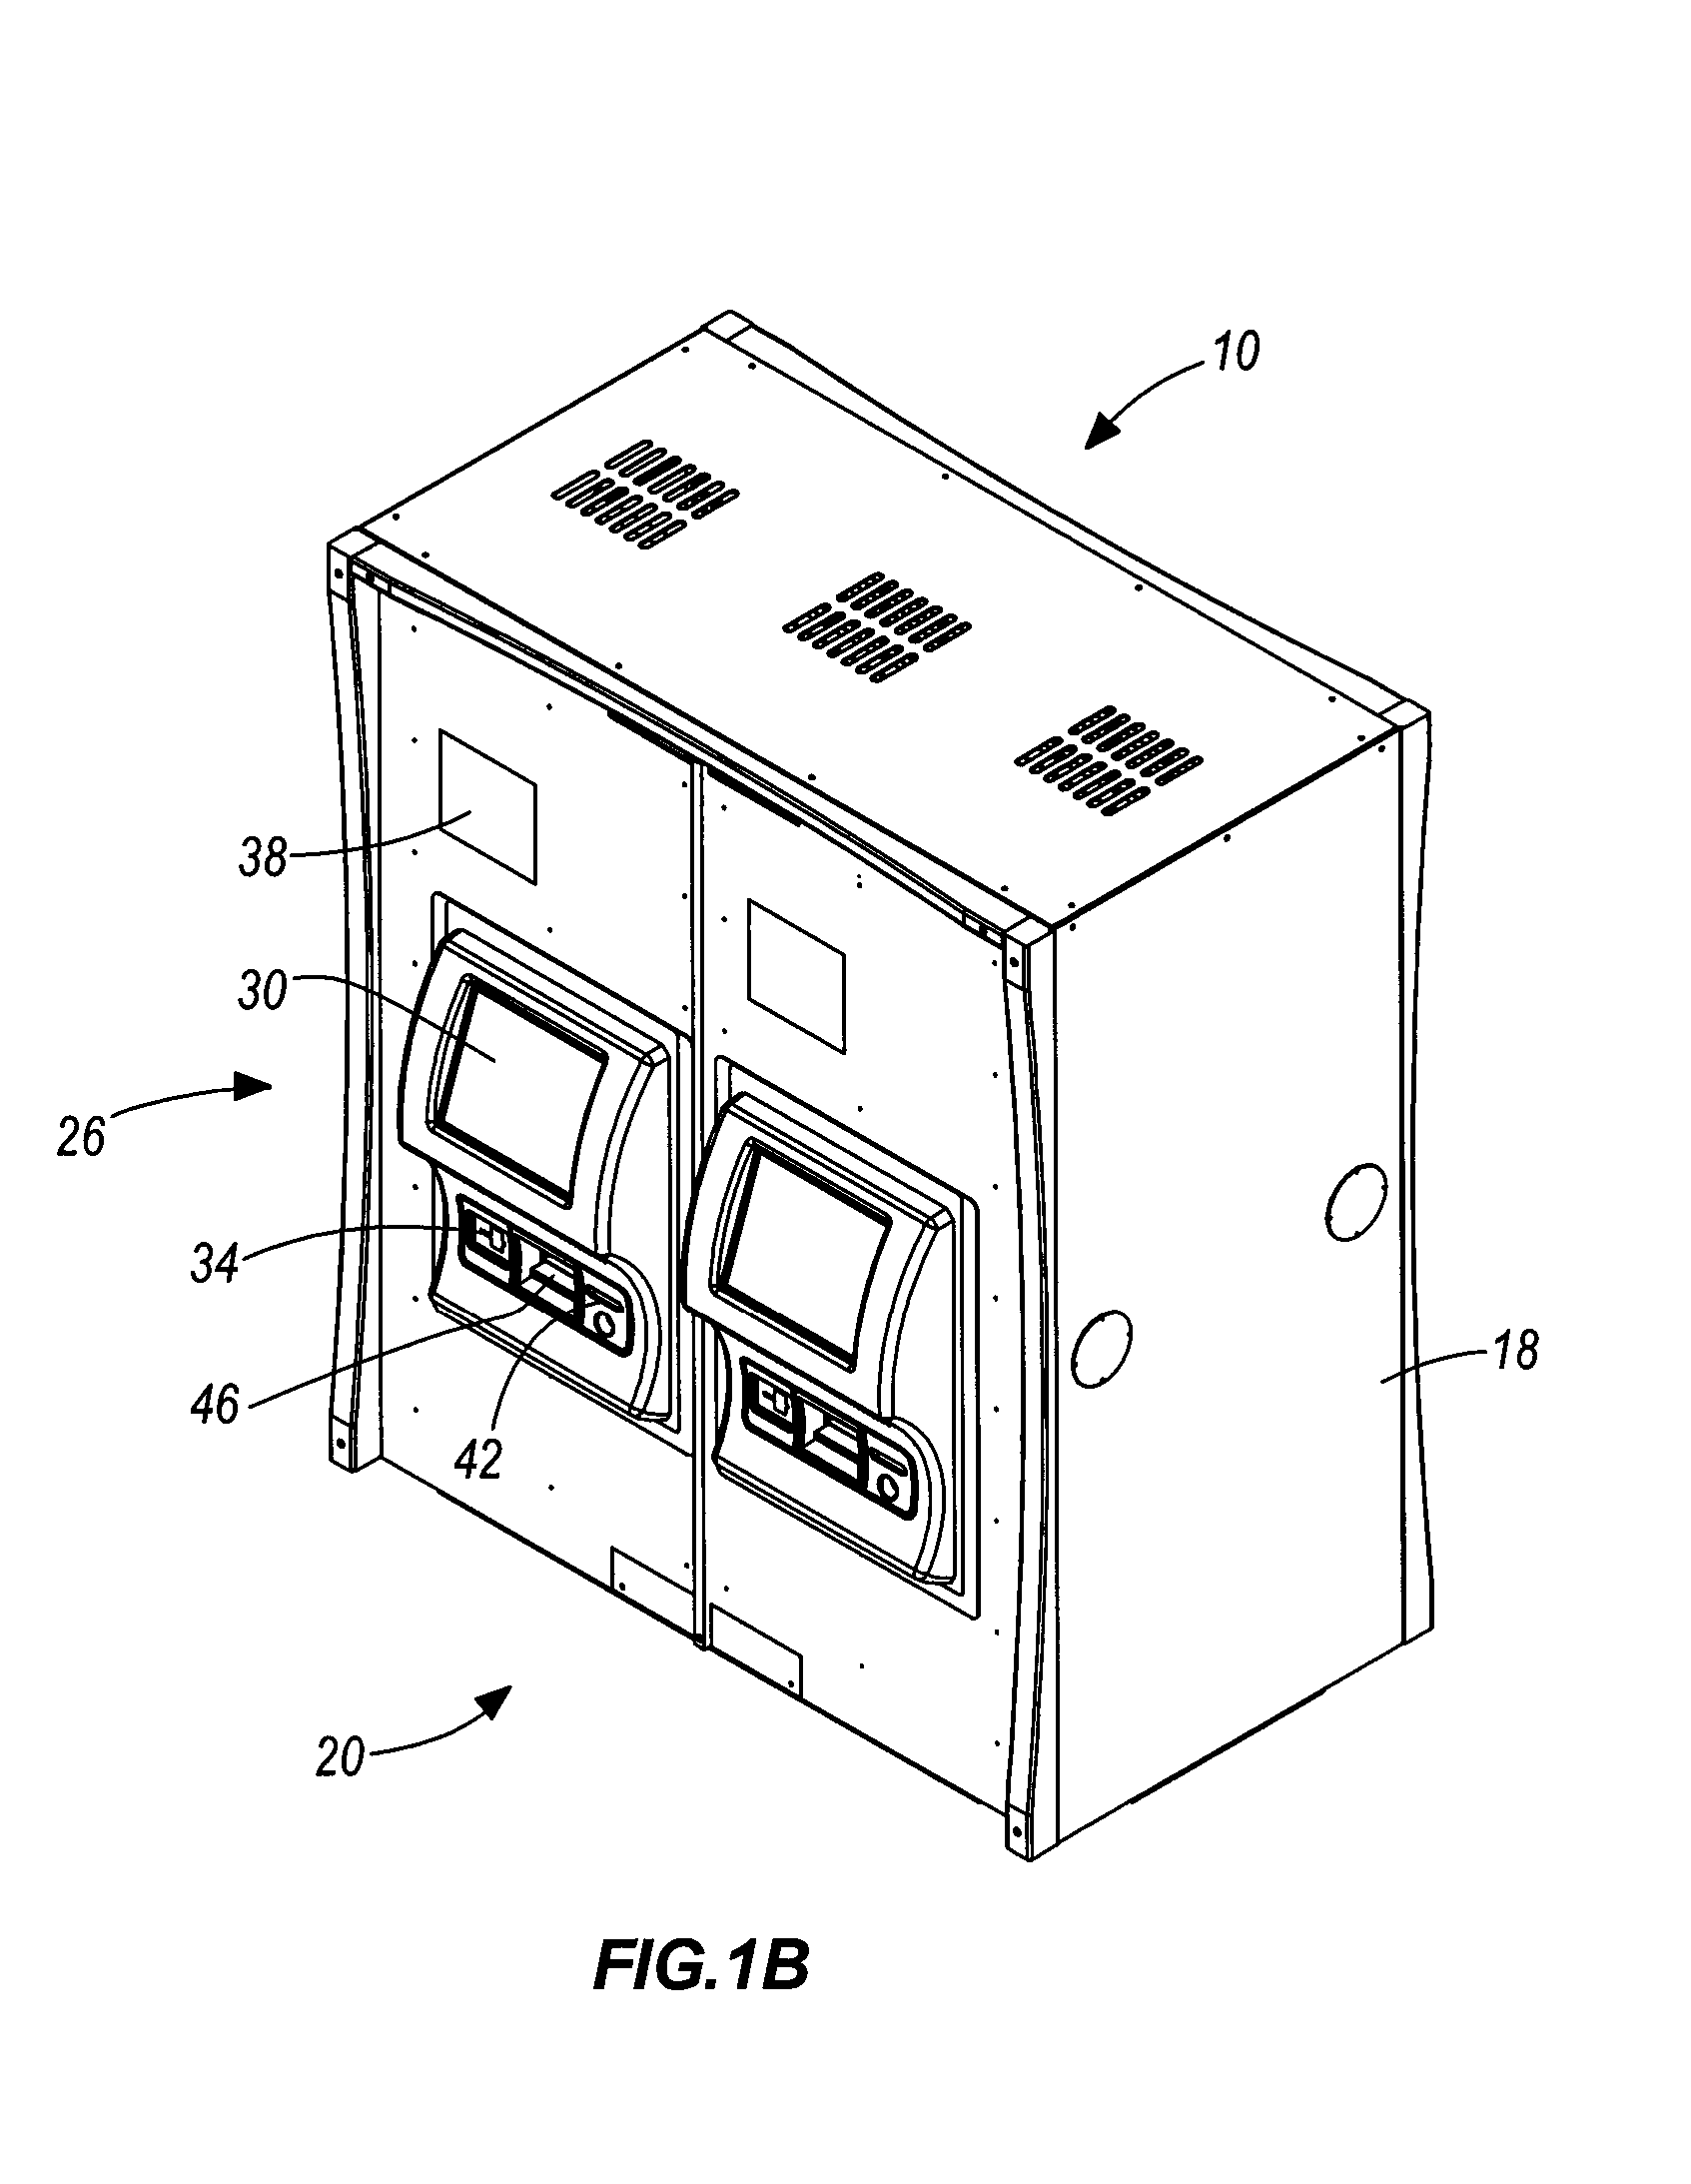 Automated business system and method of vending and returning a consumer product